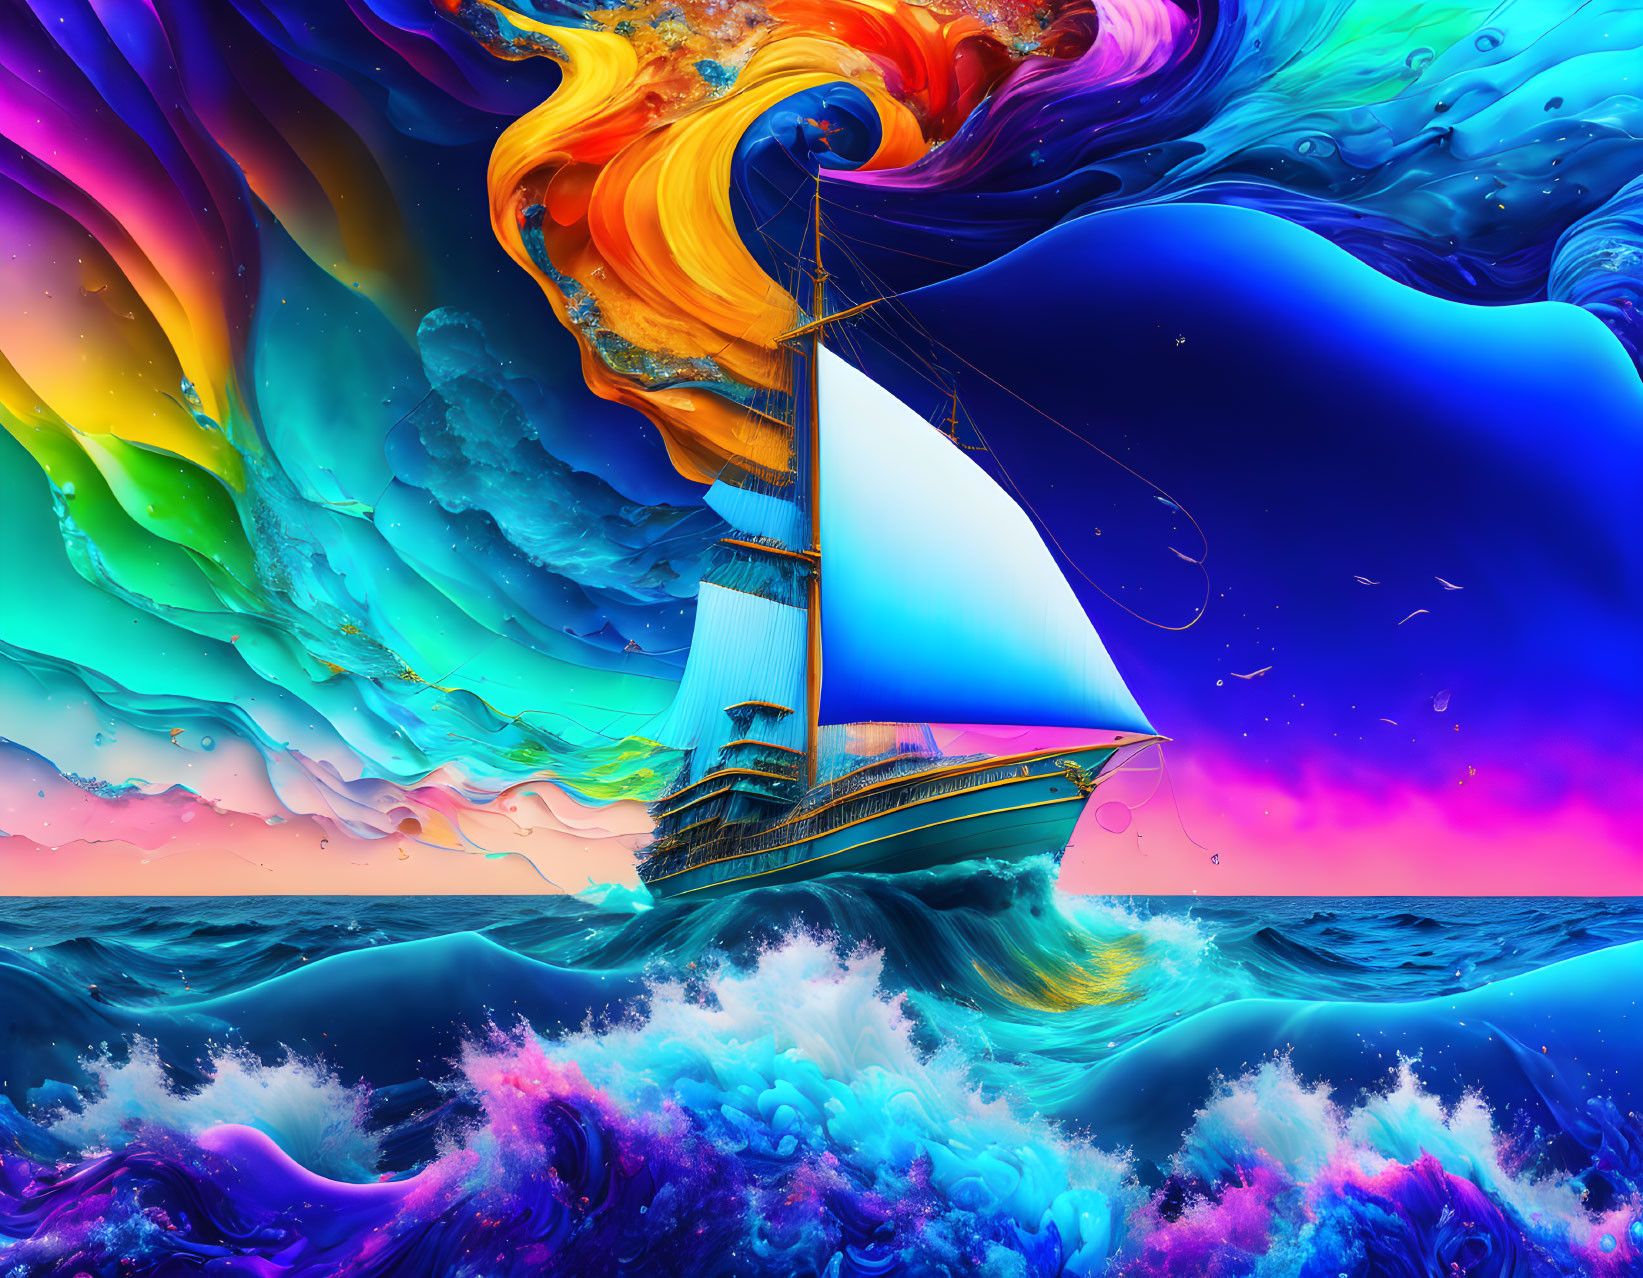 Colorful surreal seascape with classic ship sailing on swirling waves under psychedelic sky